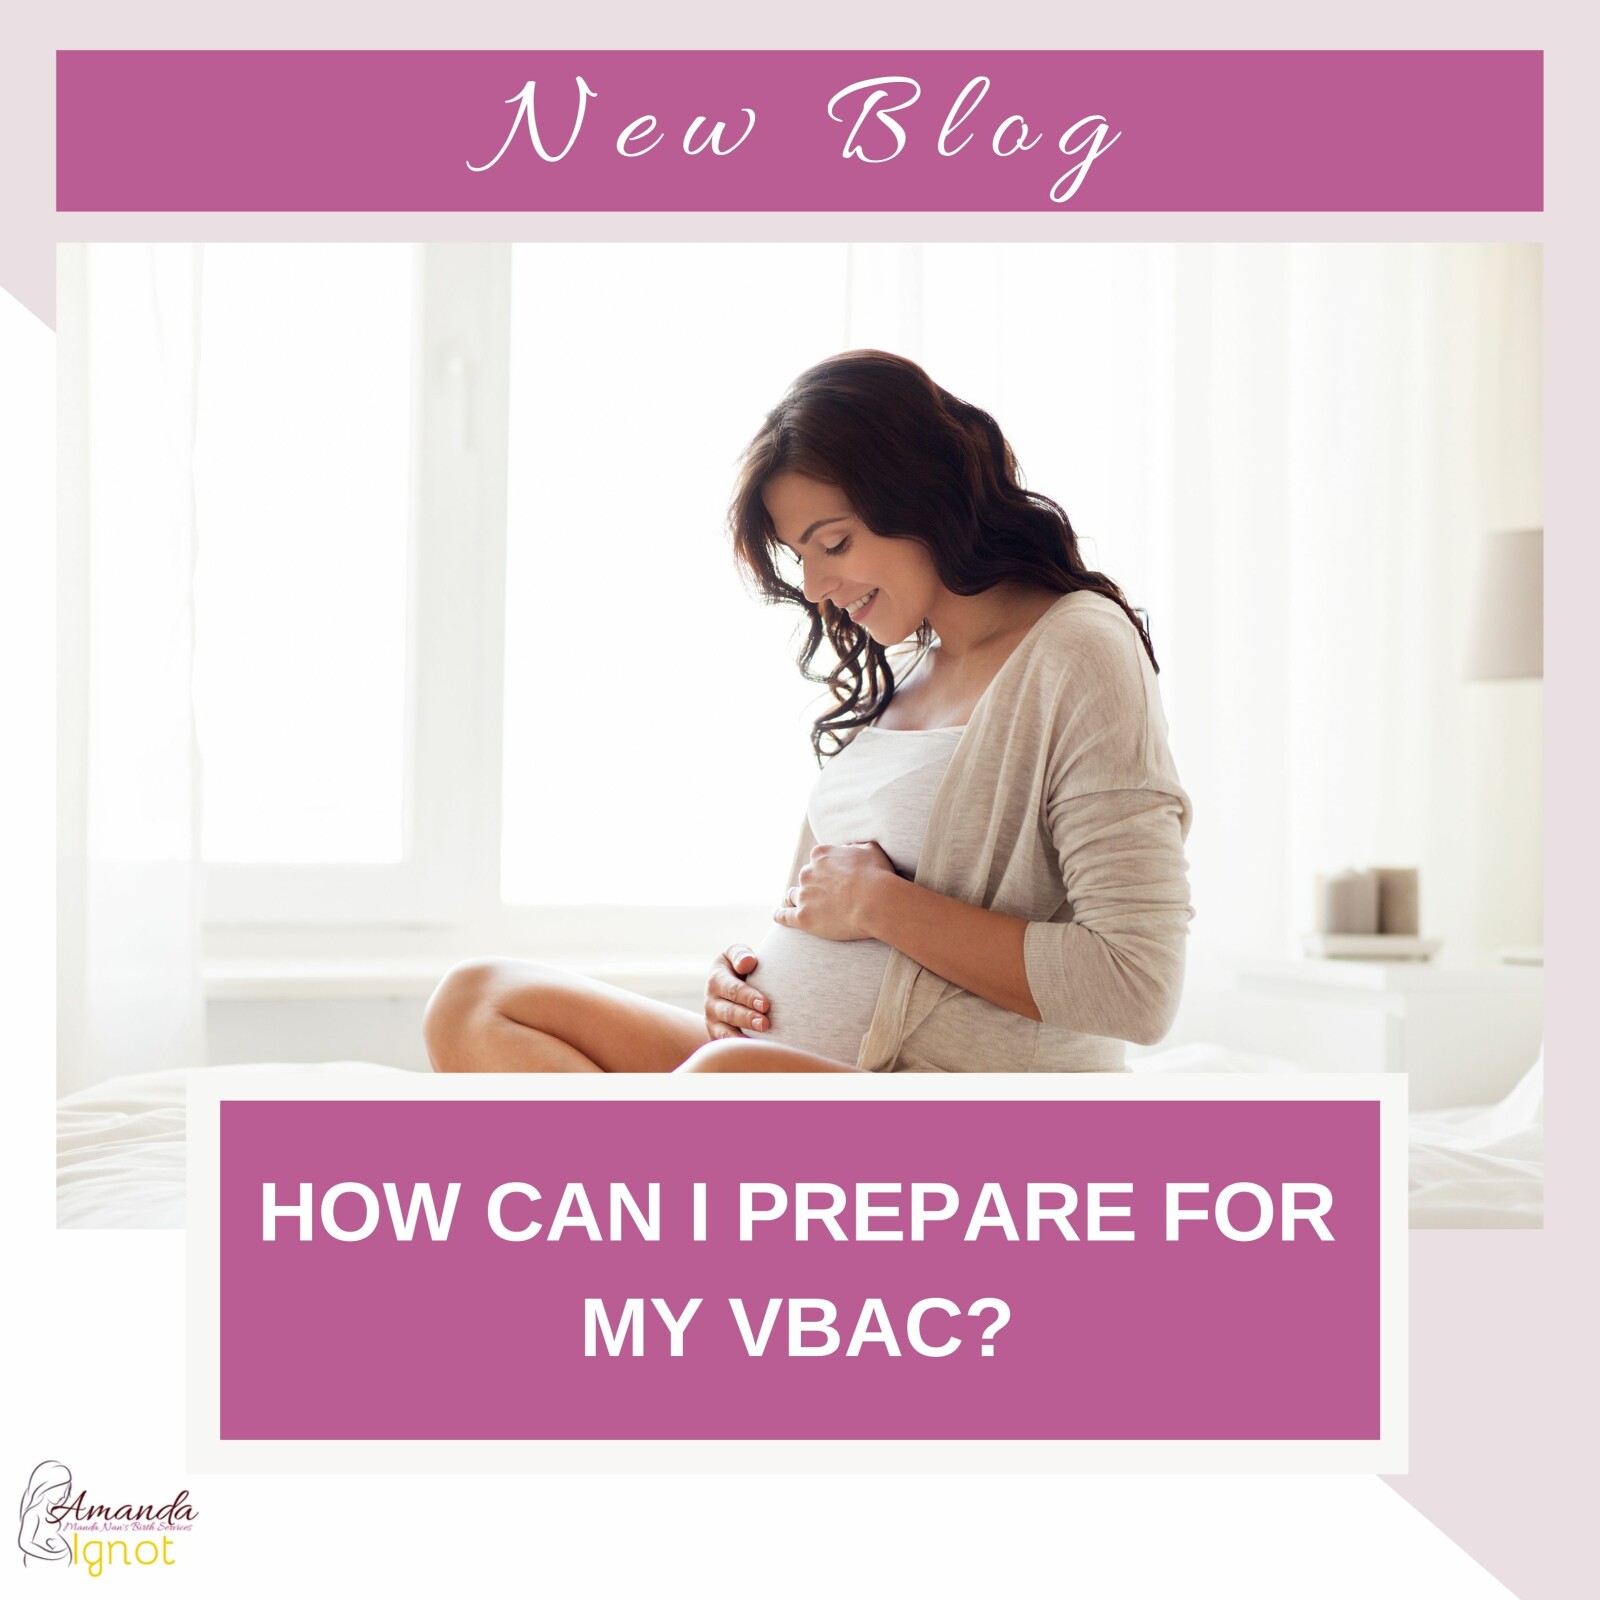 How Can I Prepare For My VBAC?